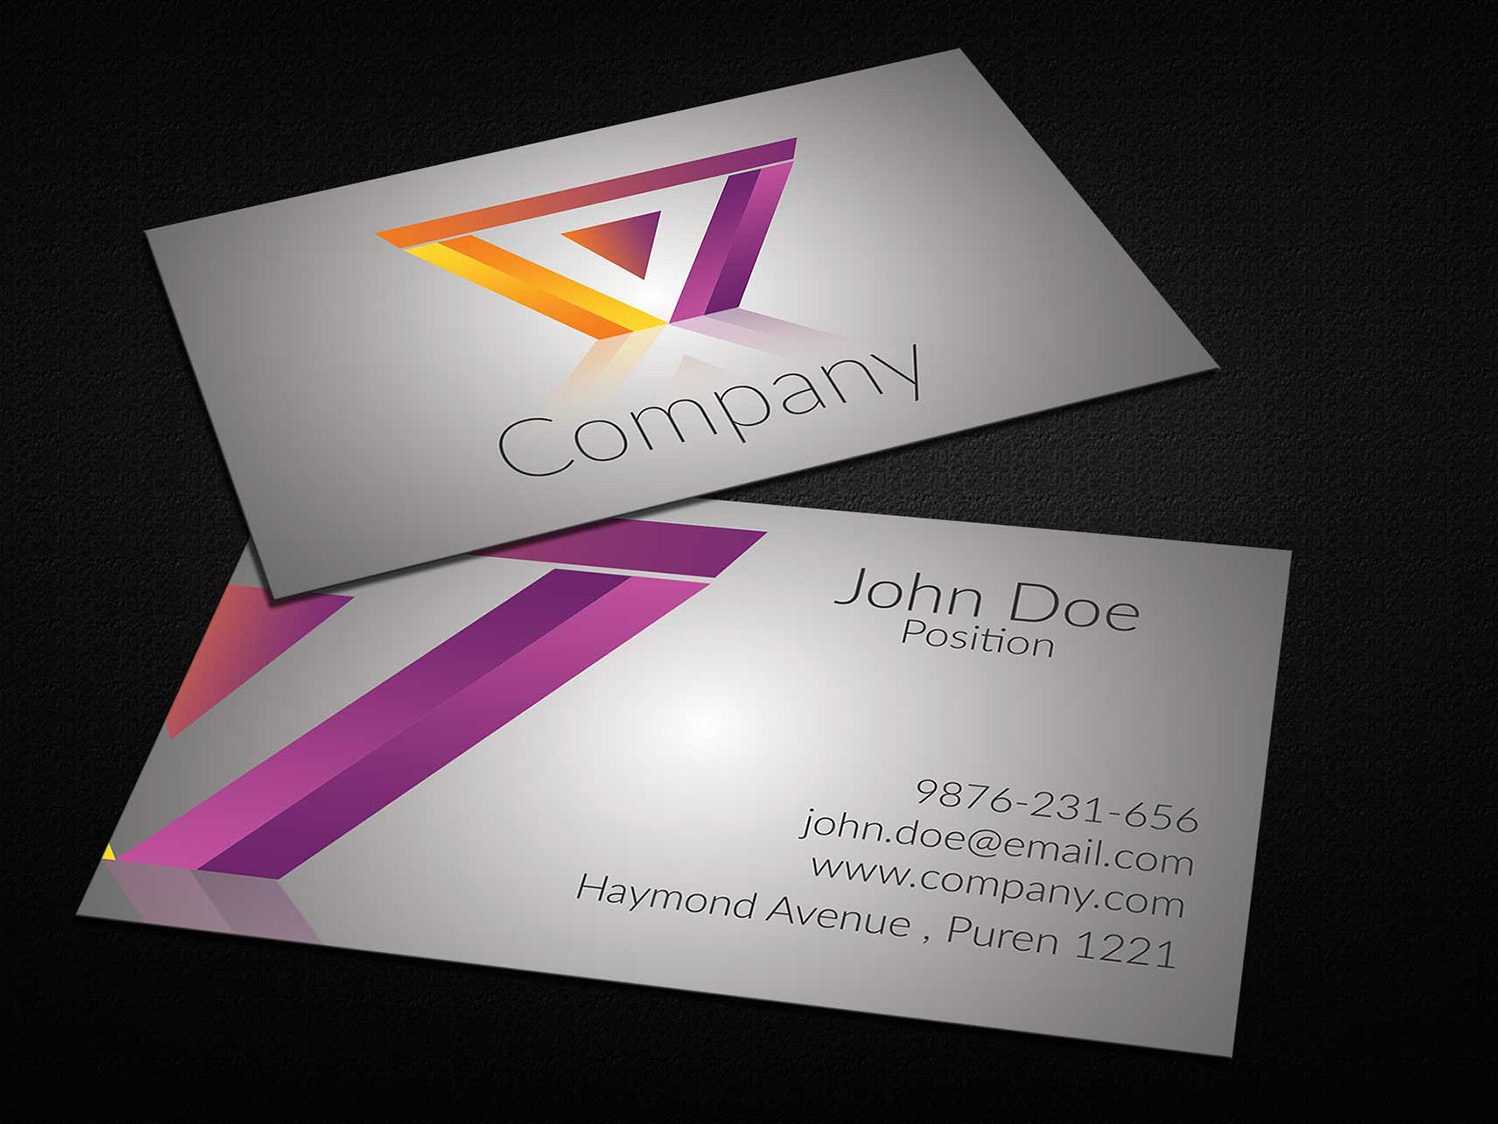 006 Building And Construction Business Card Template Intended For Construction Business Card Templates Download Free